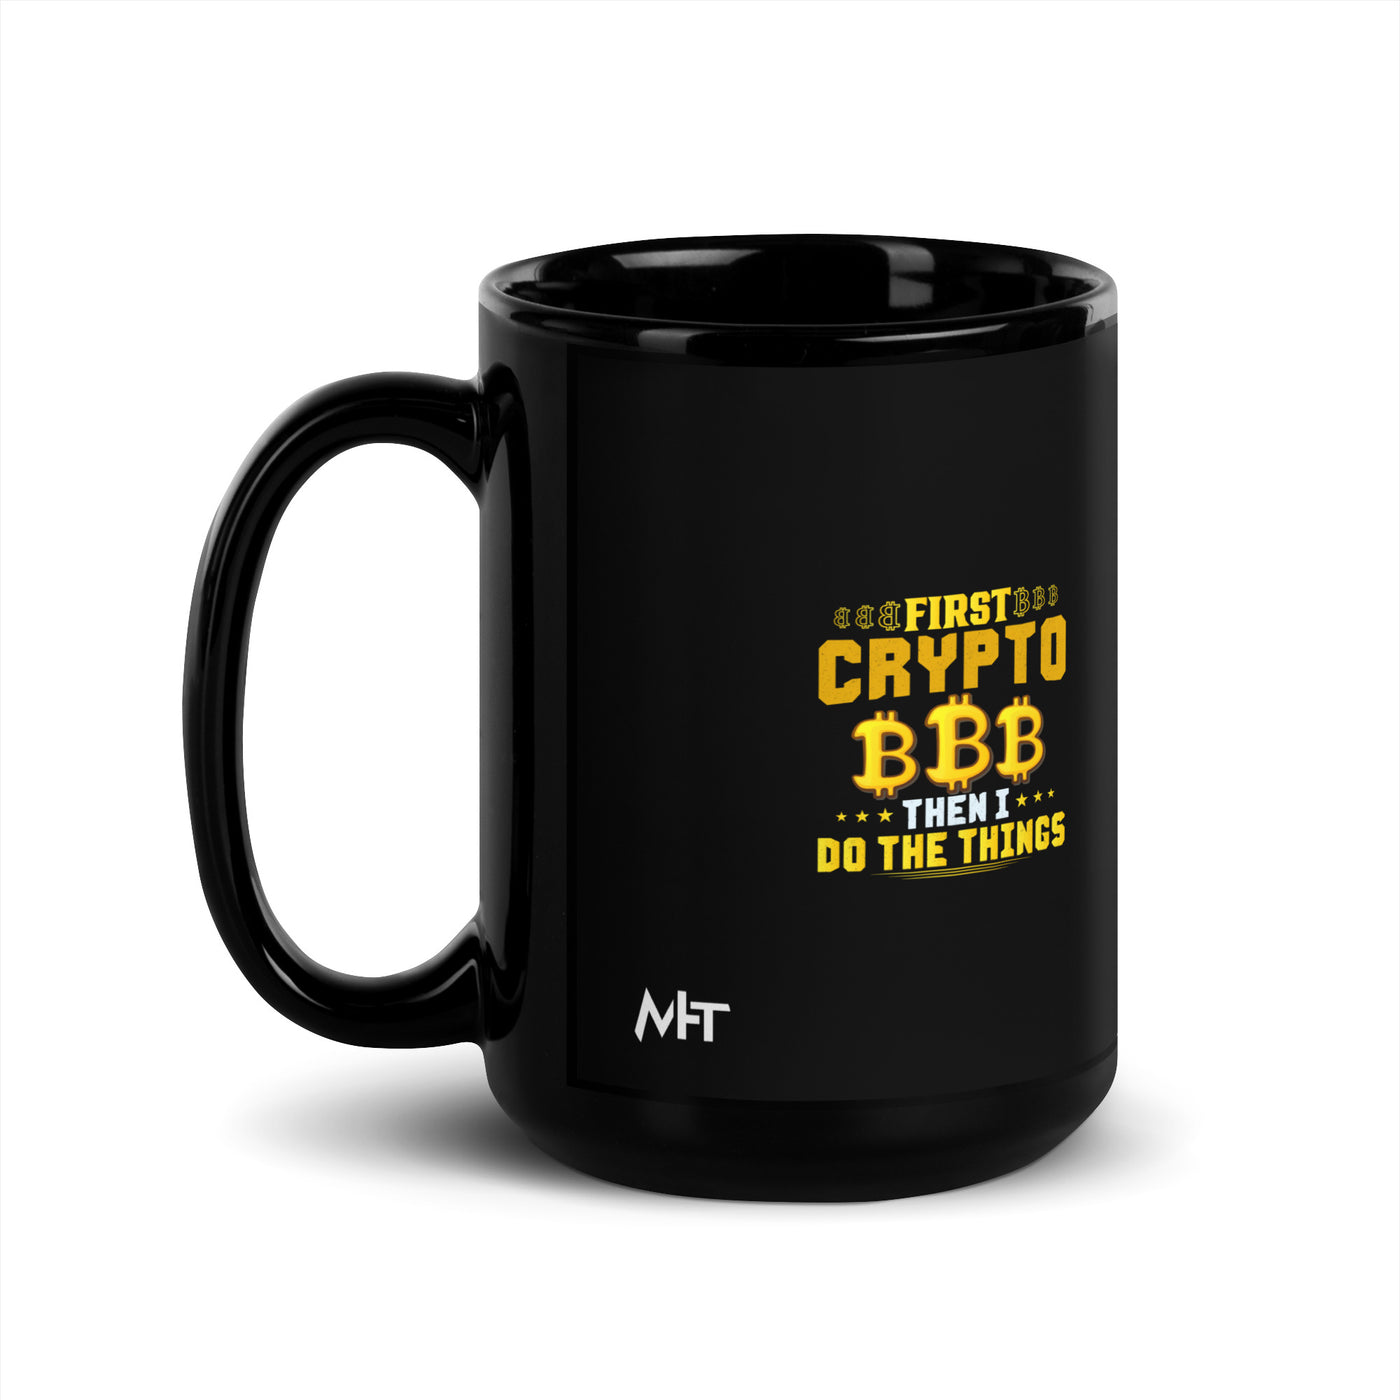 First Bitcoin, then I Do the thing - Black Glossy Mug